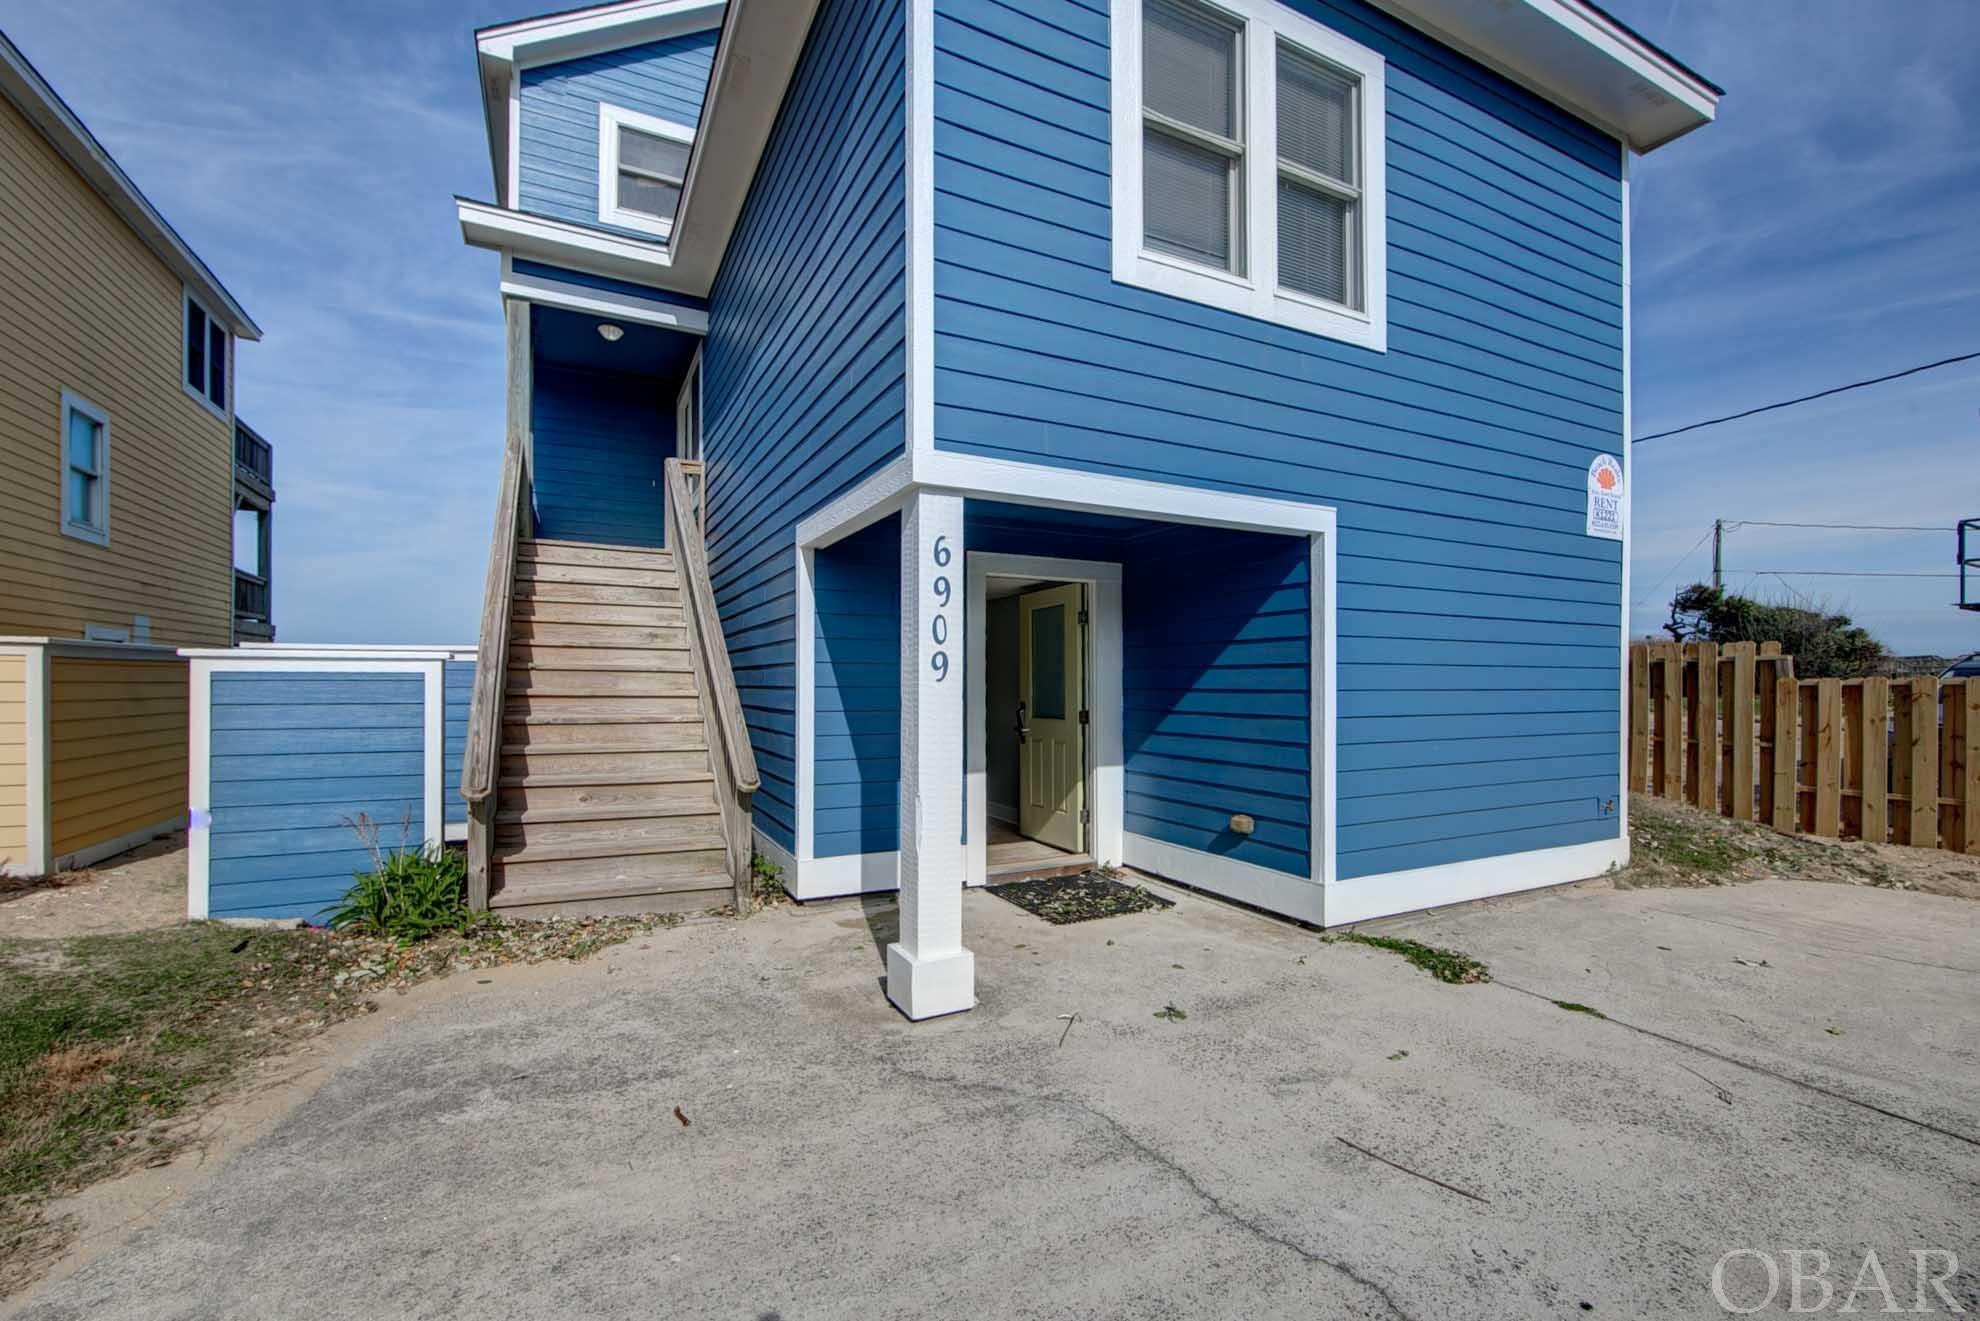 **$176K for 2023** More than $200K for 2022** This updated oceanfront in Nags Head has something for everyone. Centrally located to the best things that the Outer Banks has to offer this spacious checks all the boxes. Close to tons of restaurants, shopping and attractions this may be the perfect investment or second home!   The pool is situated so that you can see the waves hitting the shore all while lounging in the hot tub or enjoying a meal on the decks.   The indoor space is perfectly laid out (with 7 spacious bedrooms) for any size group. Perfect for entertaining with an ocean view, it is no wonder why this home has become a guest favorite.   If you are looking for a high returner that has been well maintained and lovingly cared for, look no further.